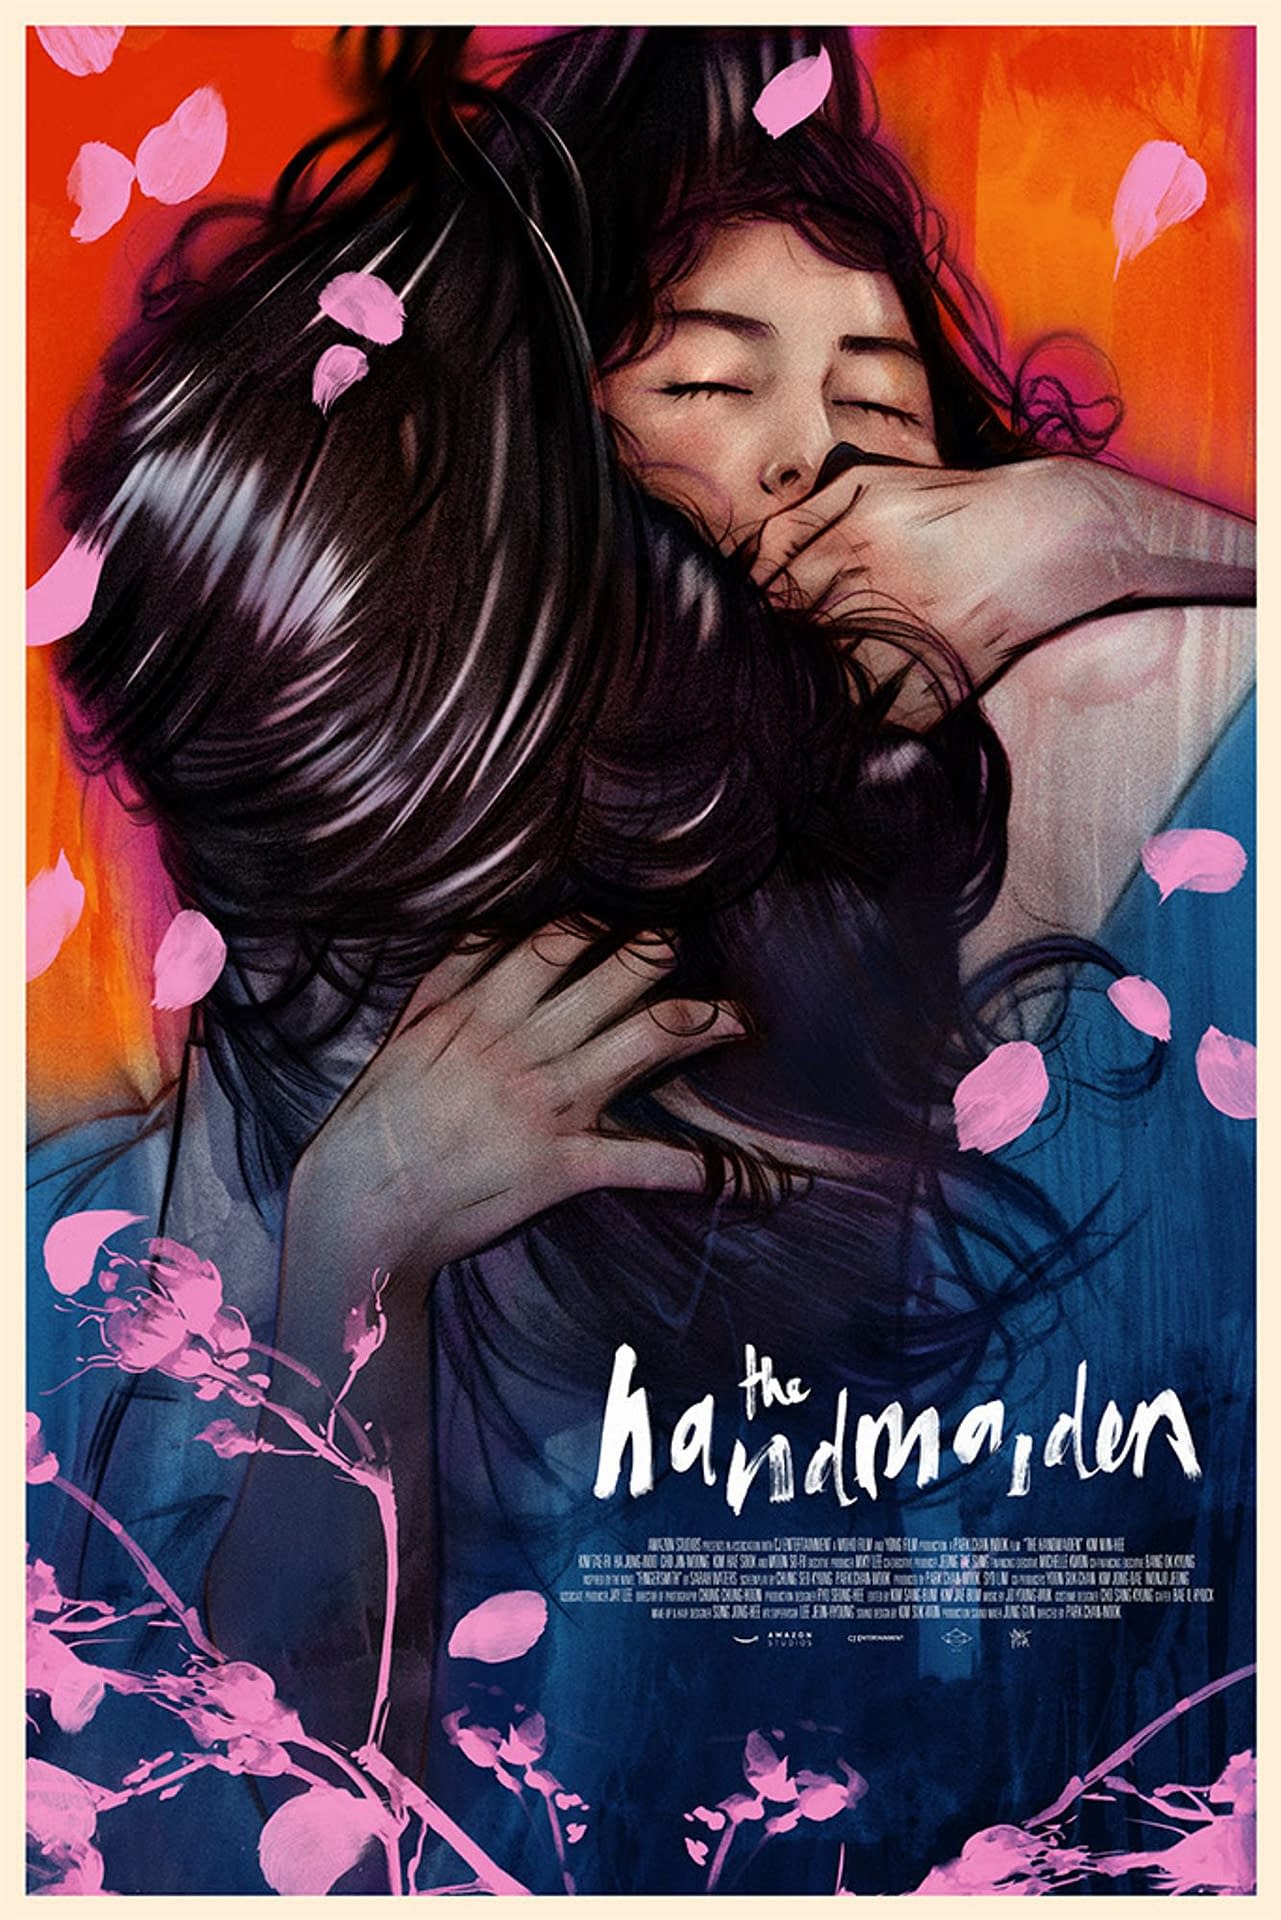 Mondo Heads to Thought Bubble with Exclusive Poster for "The Handmaiden"